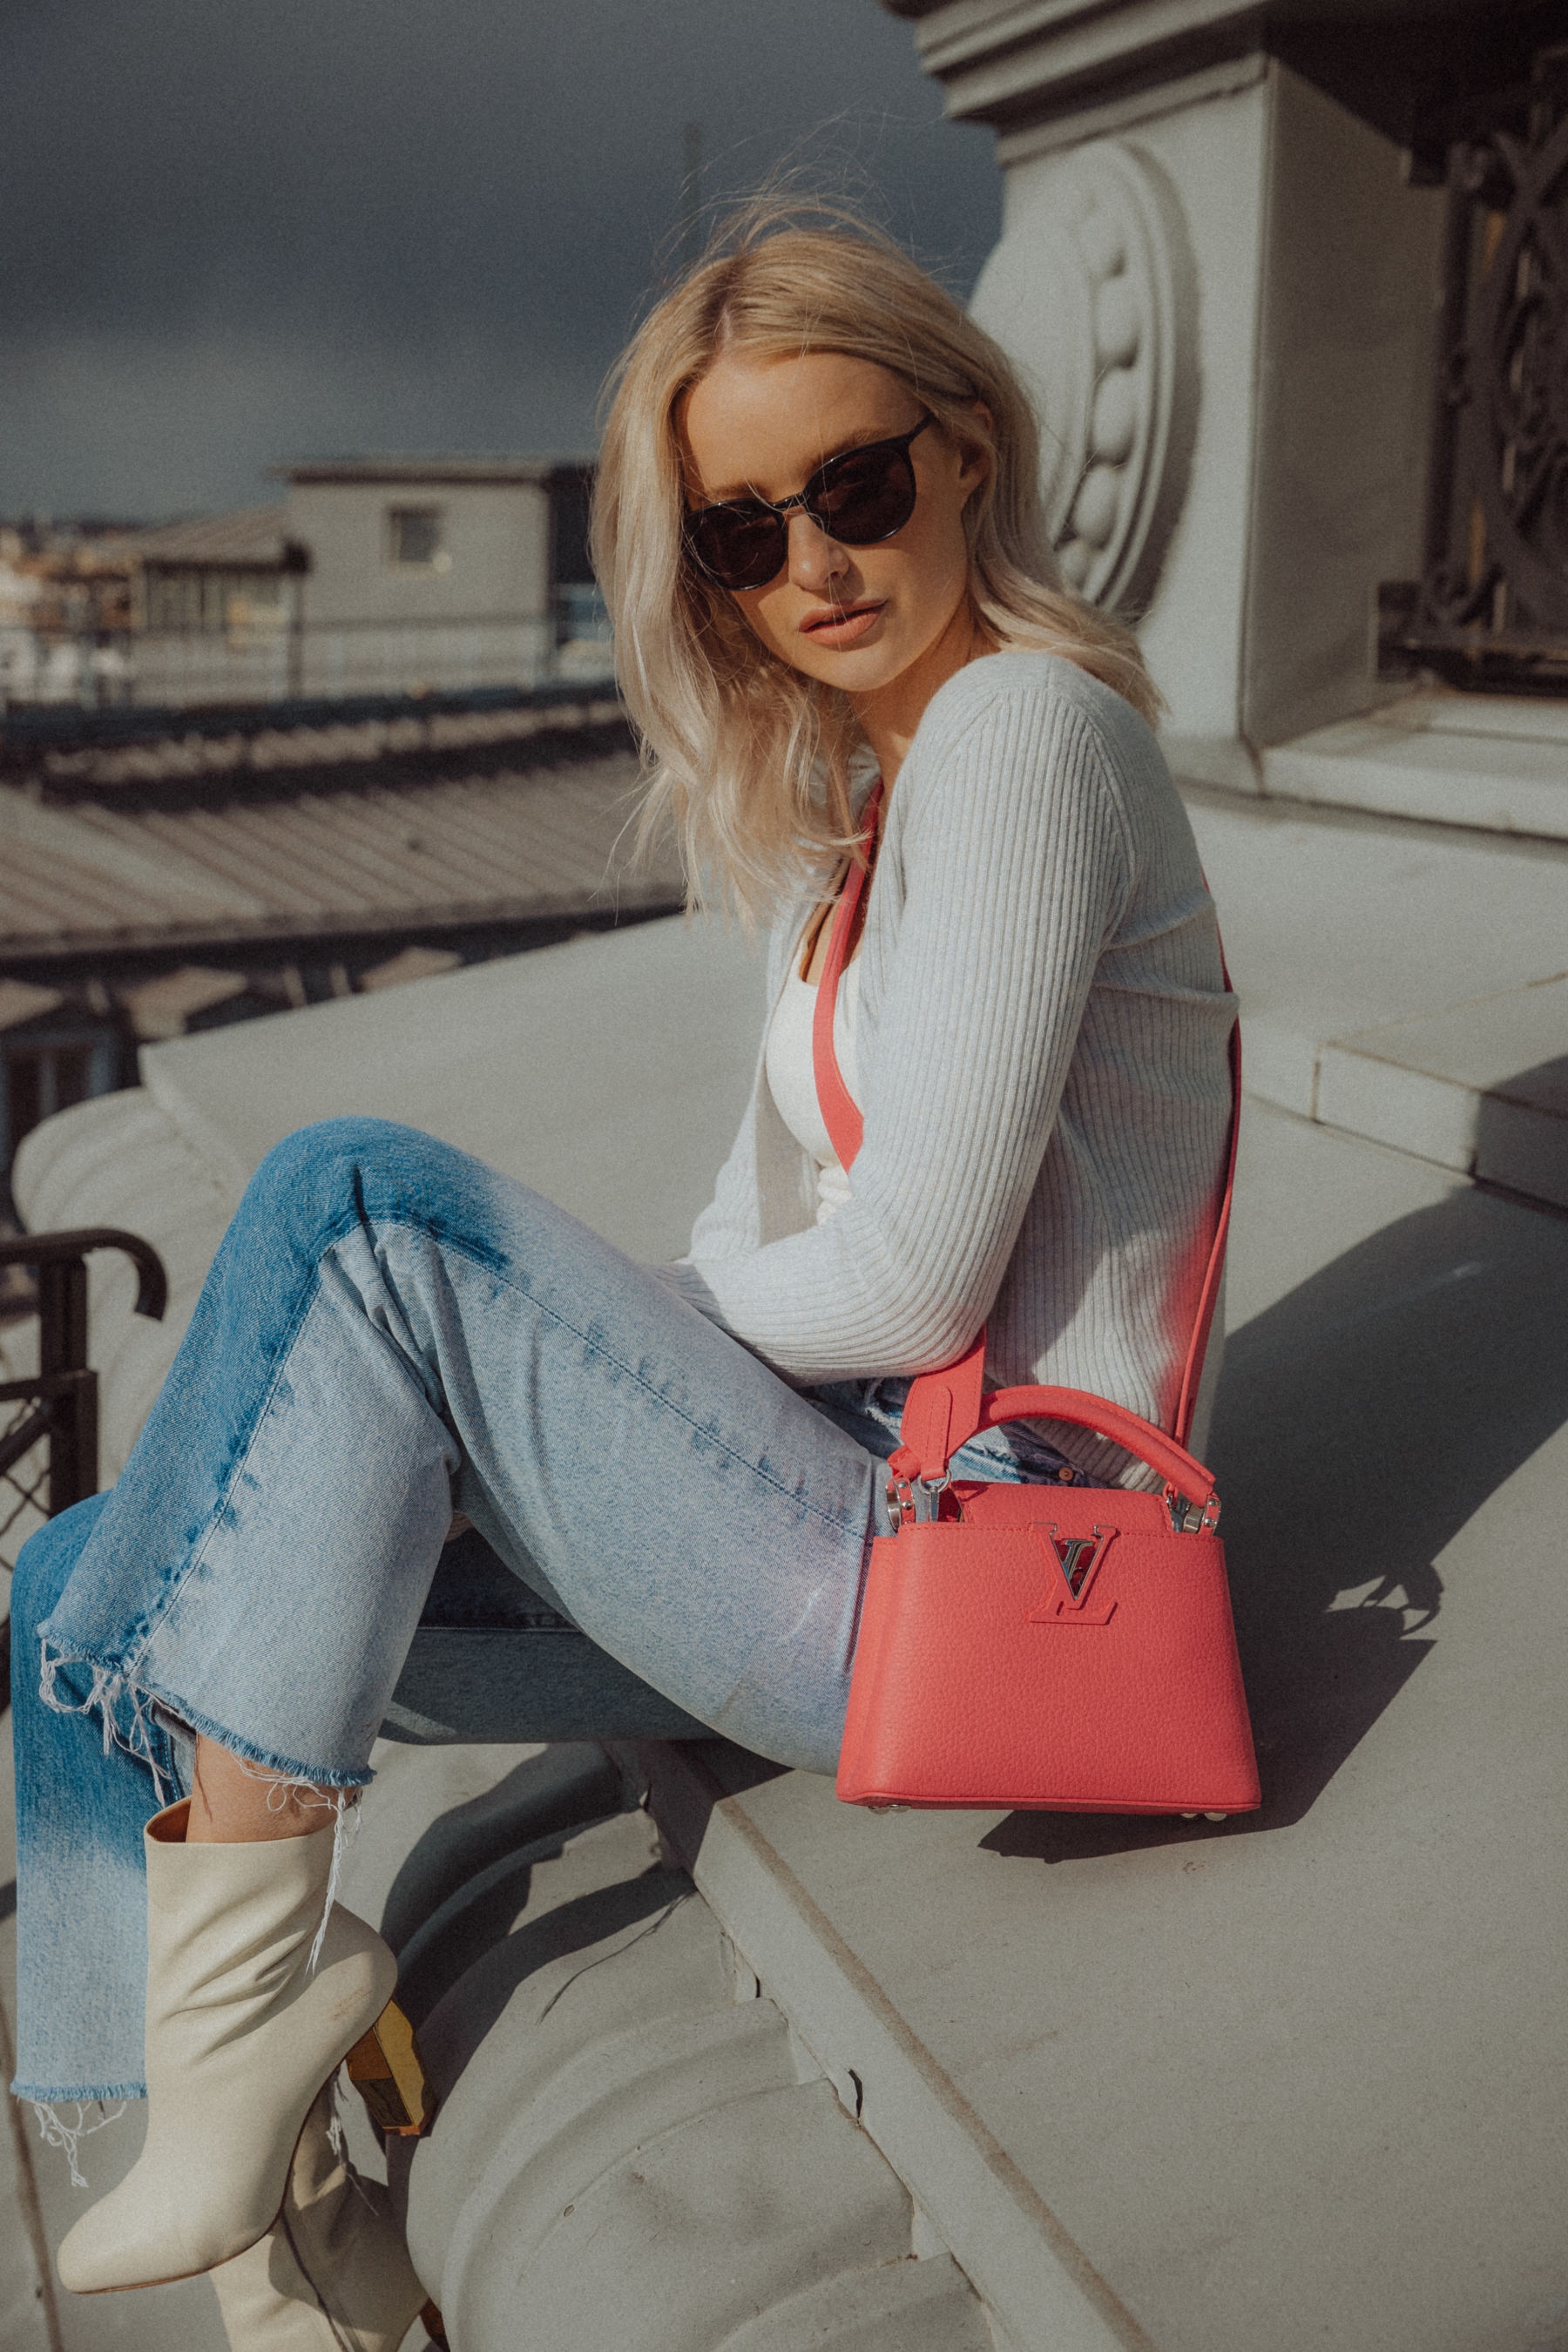 My Most Worn Pieces in 2020 so Far - Inthefrow